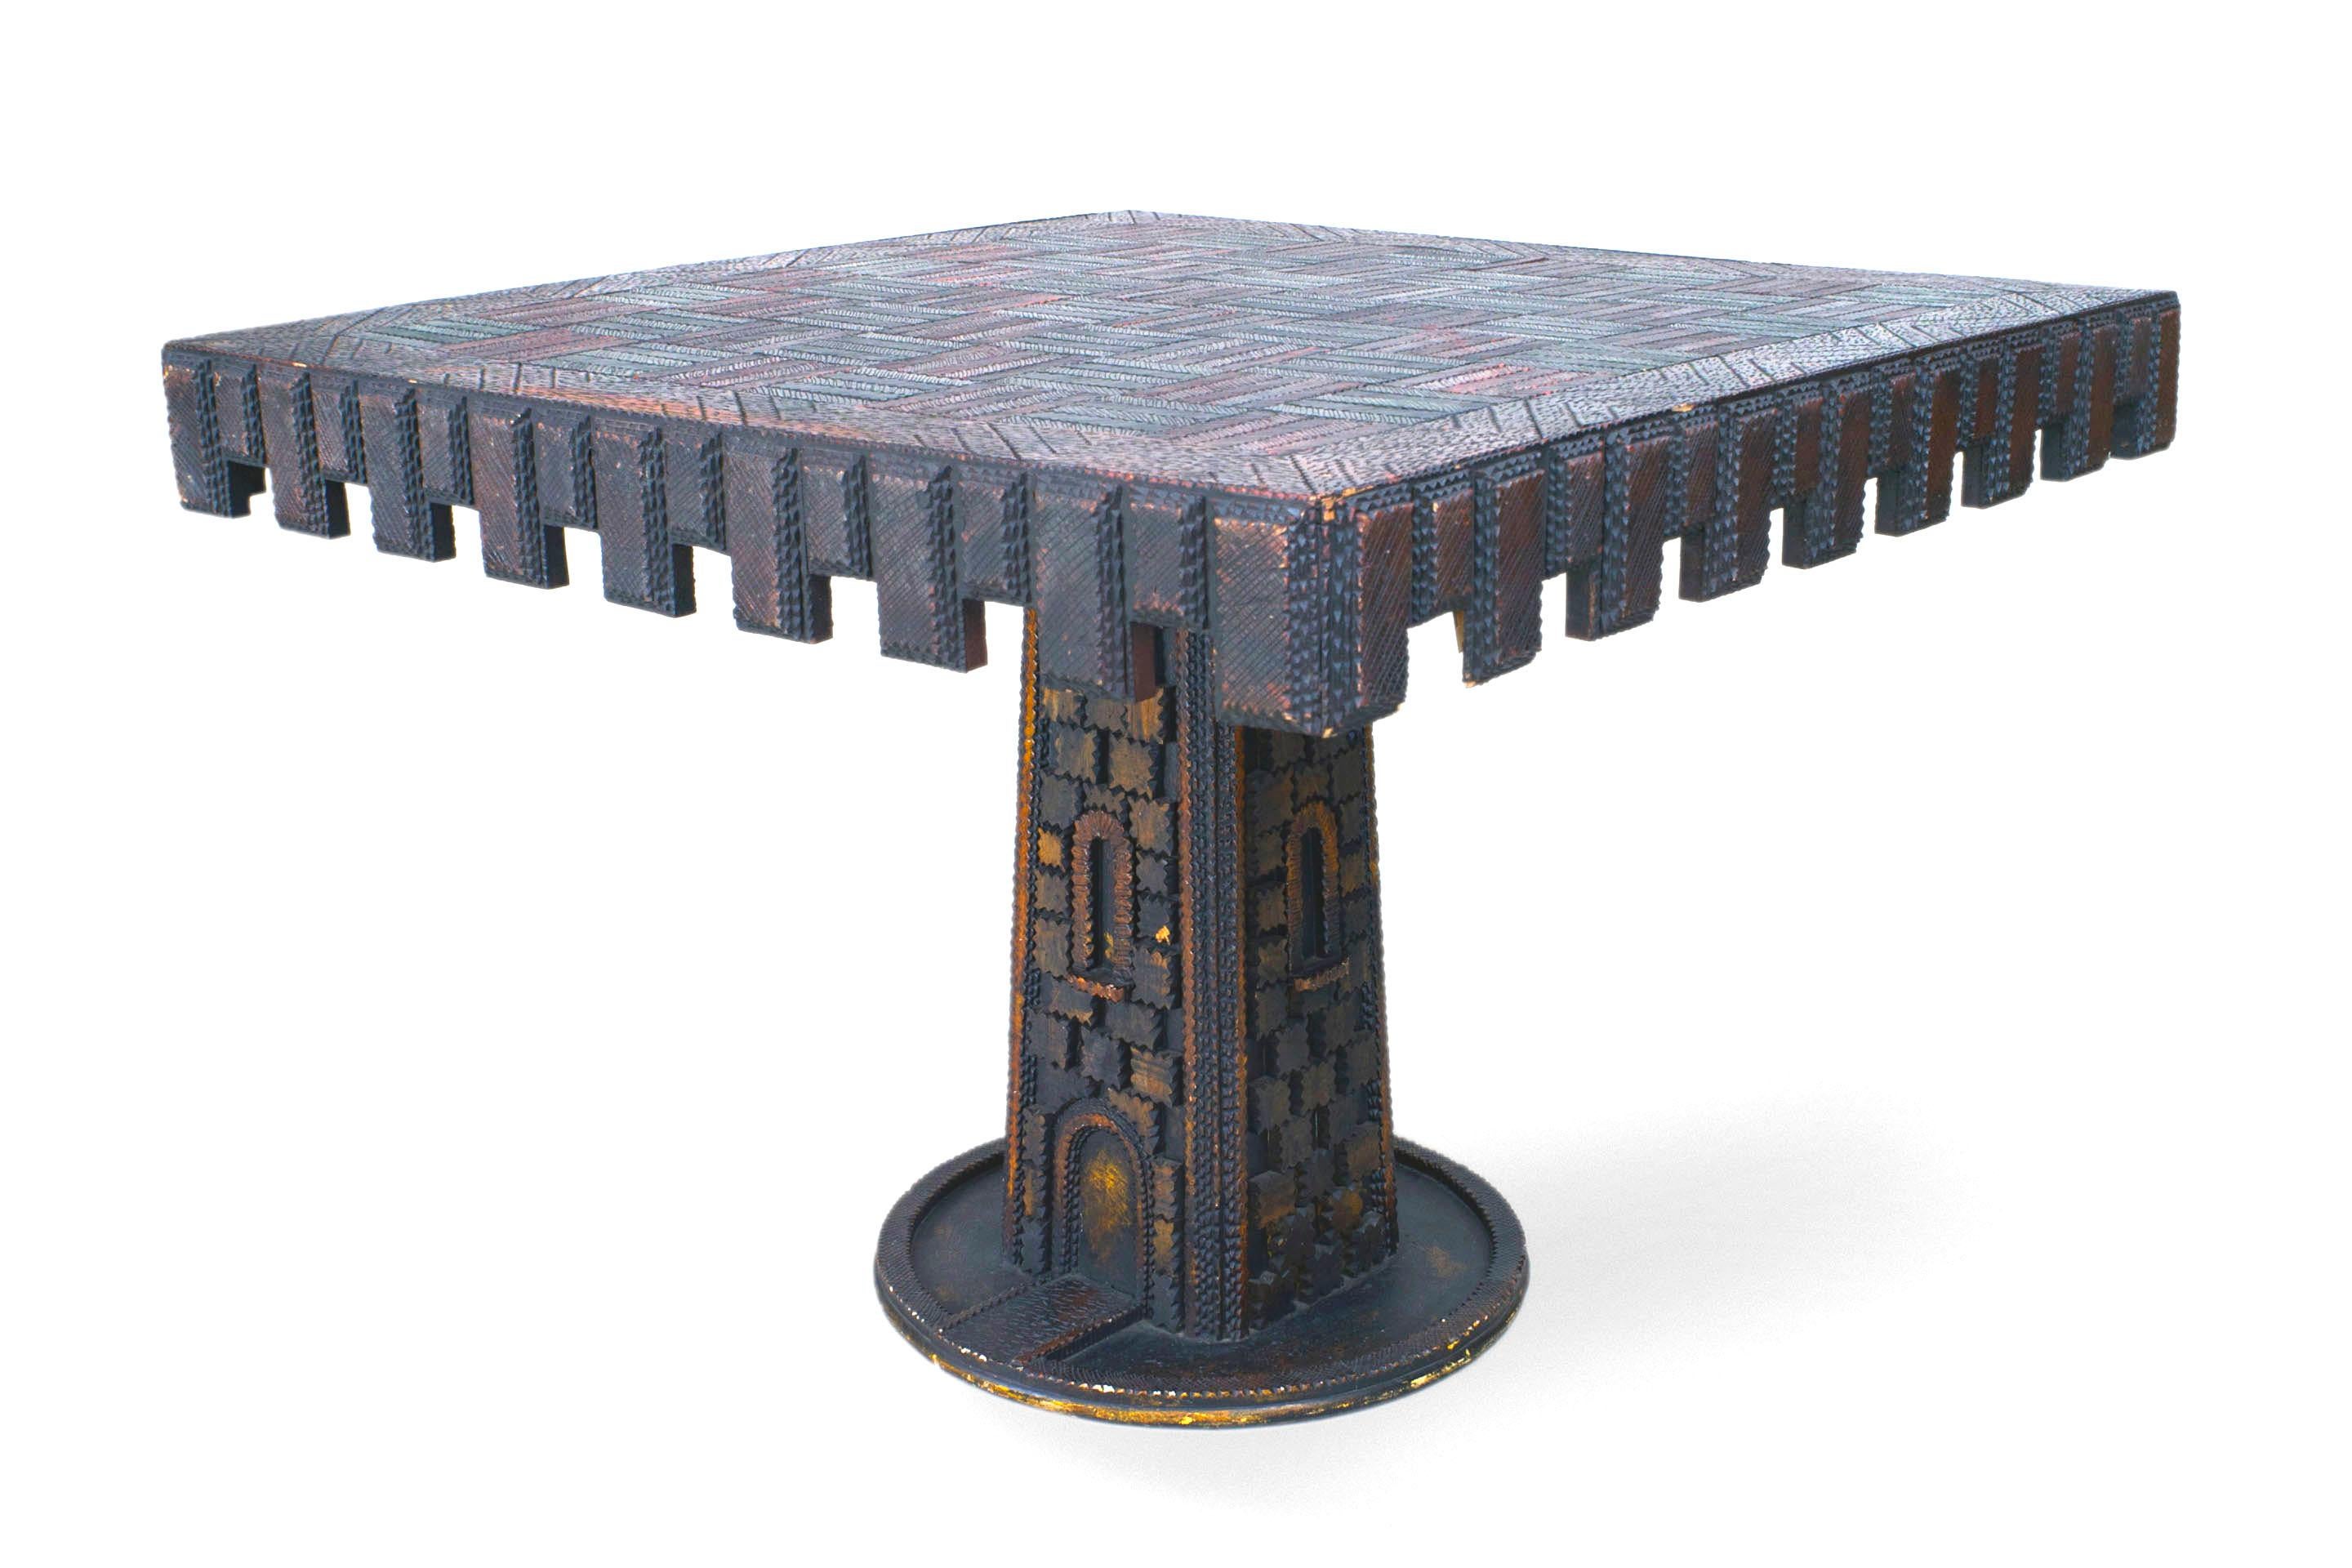 American Rustic Tramp Art style game table with green & red painted top supported with a pedestal base on a round platform (32 chess pieces)(signed 1994 PAUL CUNNINGHAM)
